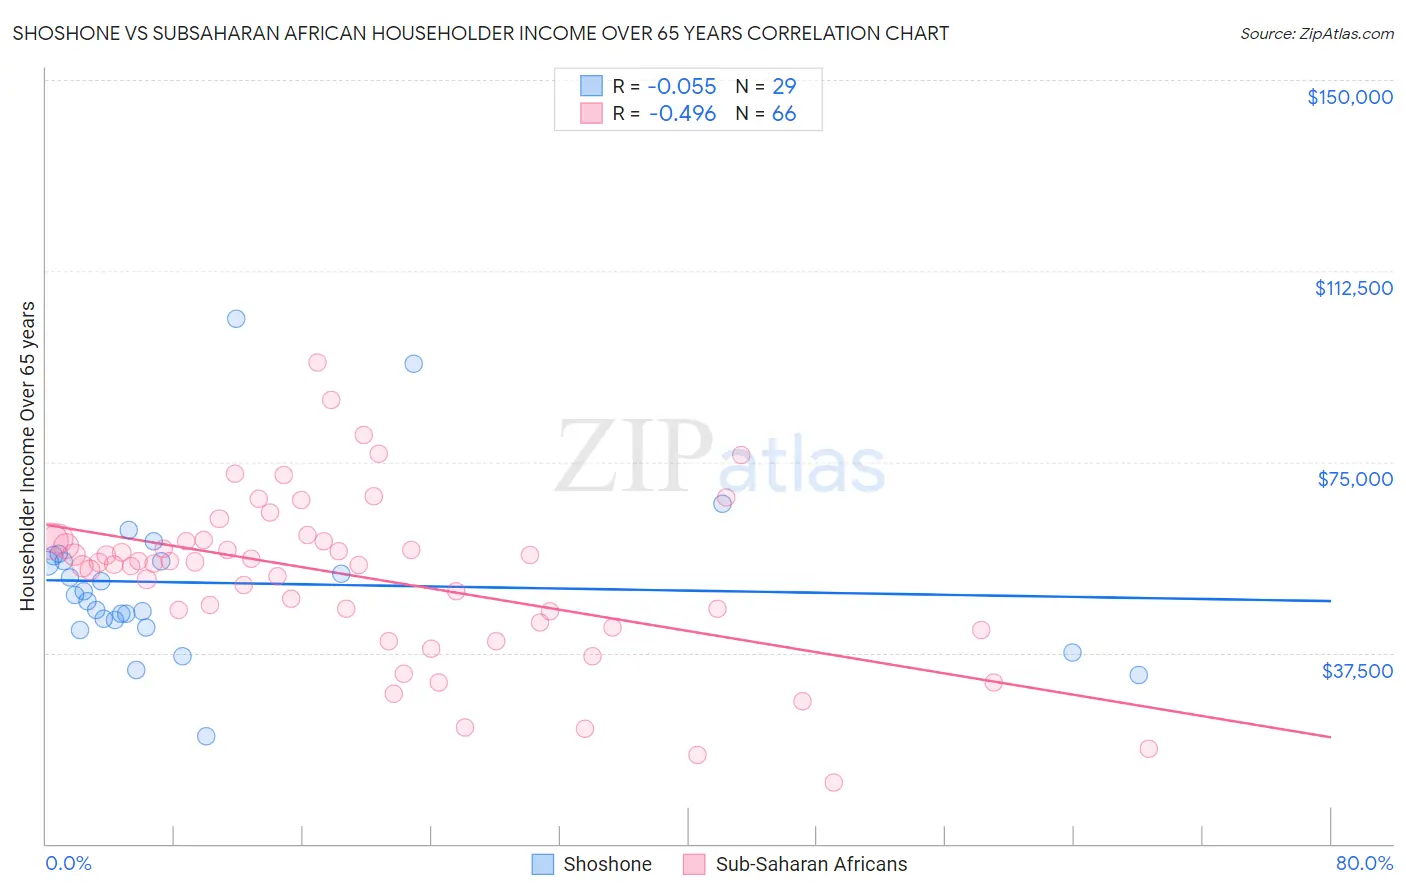 Shoshone vs Subsaharan African Householder Income Over 65 years